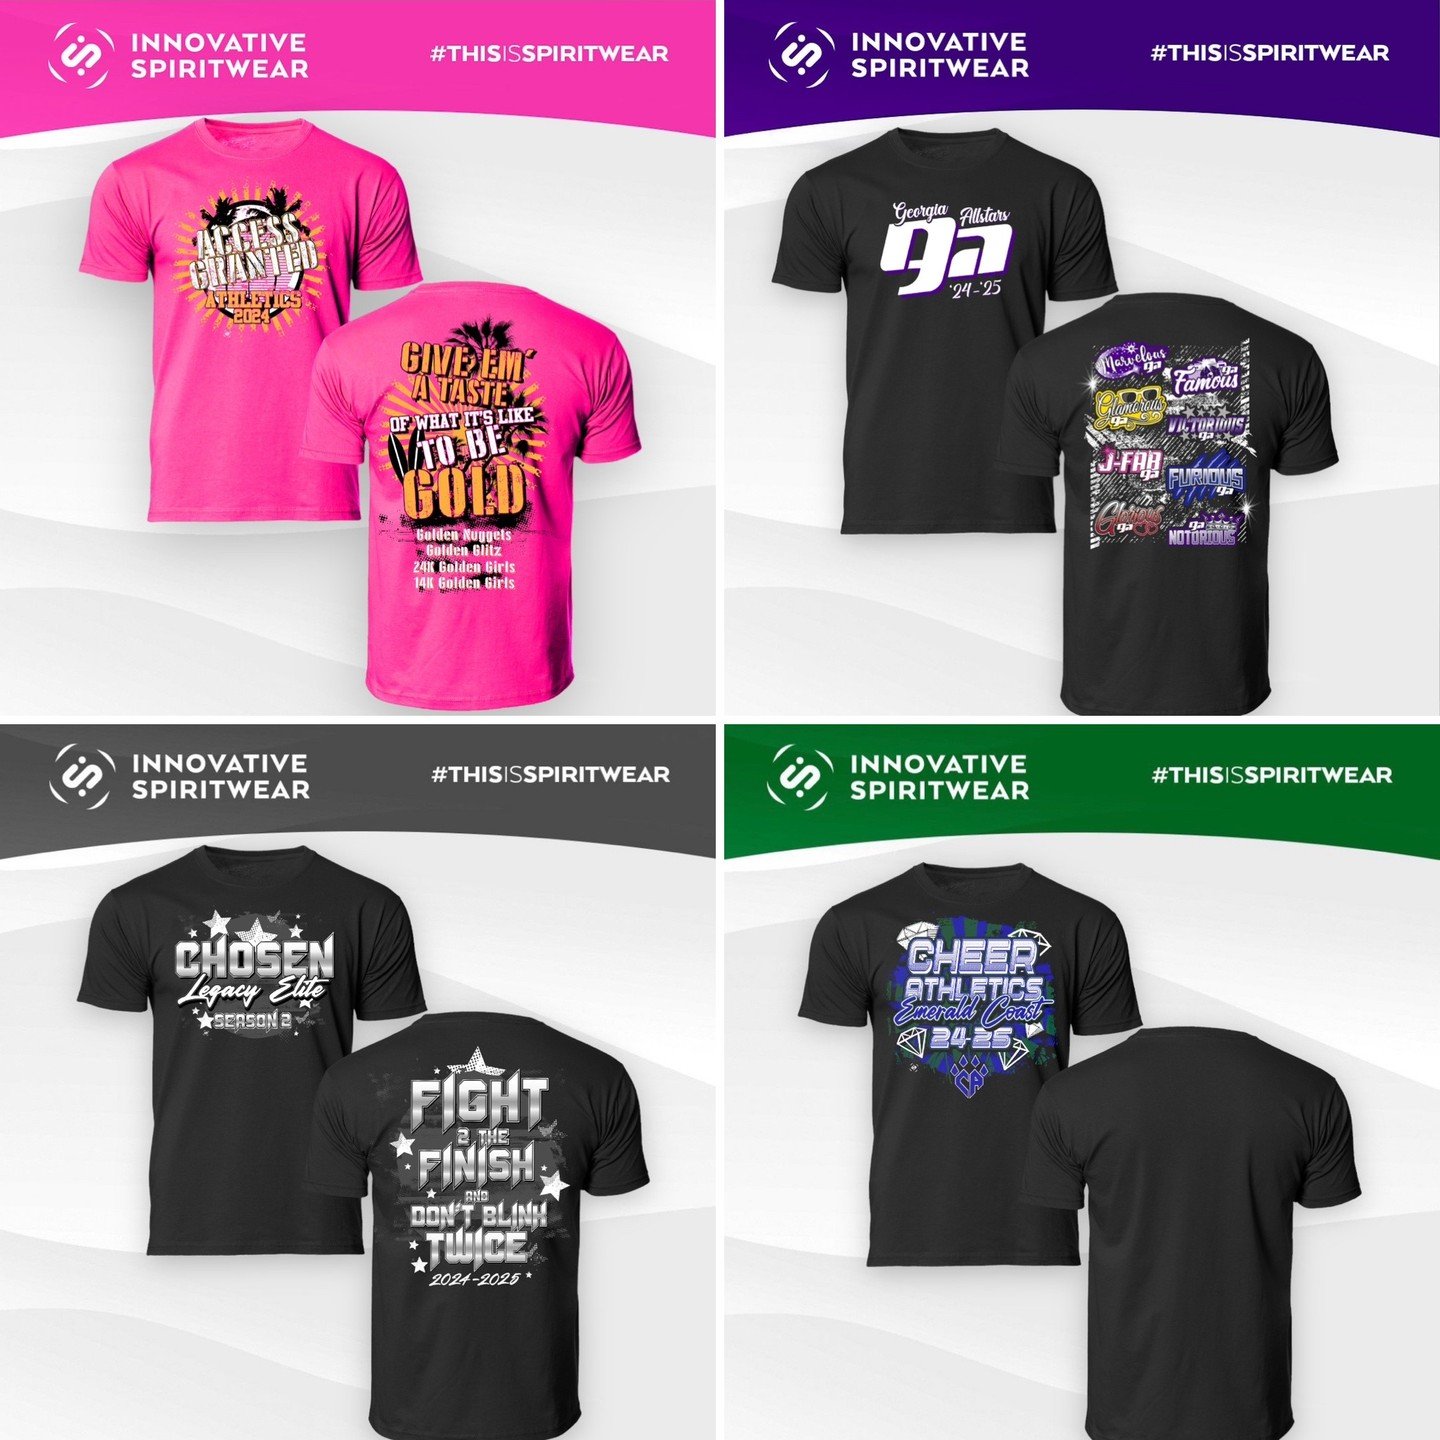 Let Innovative Spiritwear Create FREE TEAM LOGOS For Your New Season!
Order New Season Screen Printed Program Or Team T-Shirts/Tanks In May And Get FREE Team Logos!
Here Are Just A Few Programs We've Worked With!
Choose to be INNOVATIVE this season.&